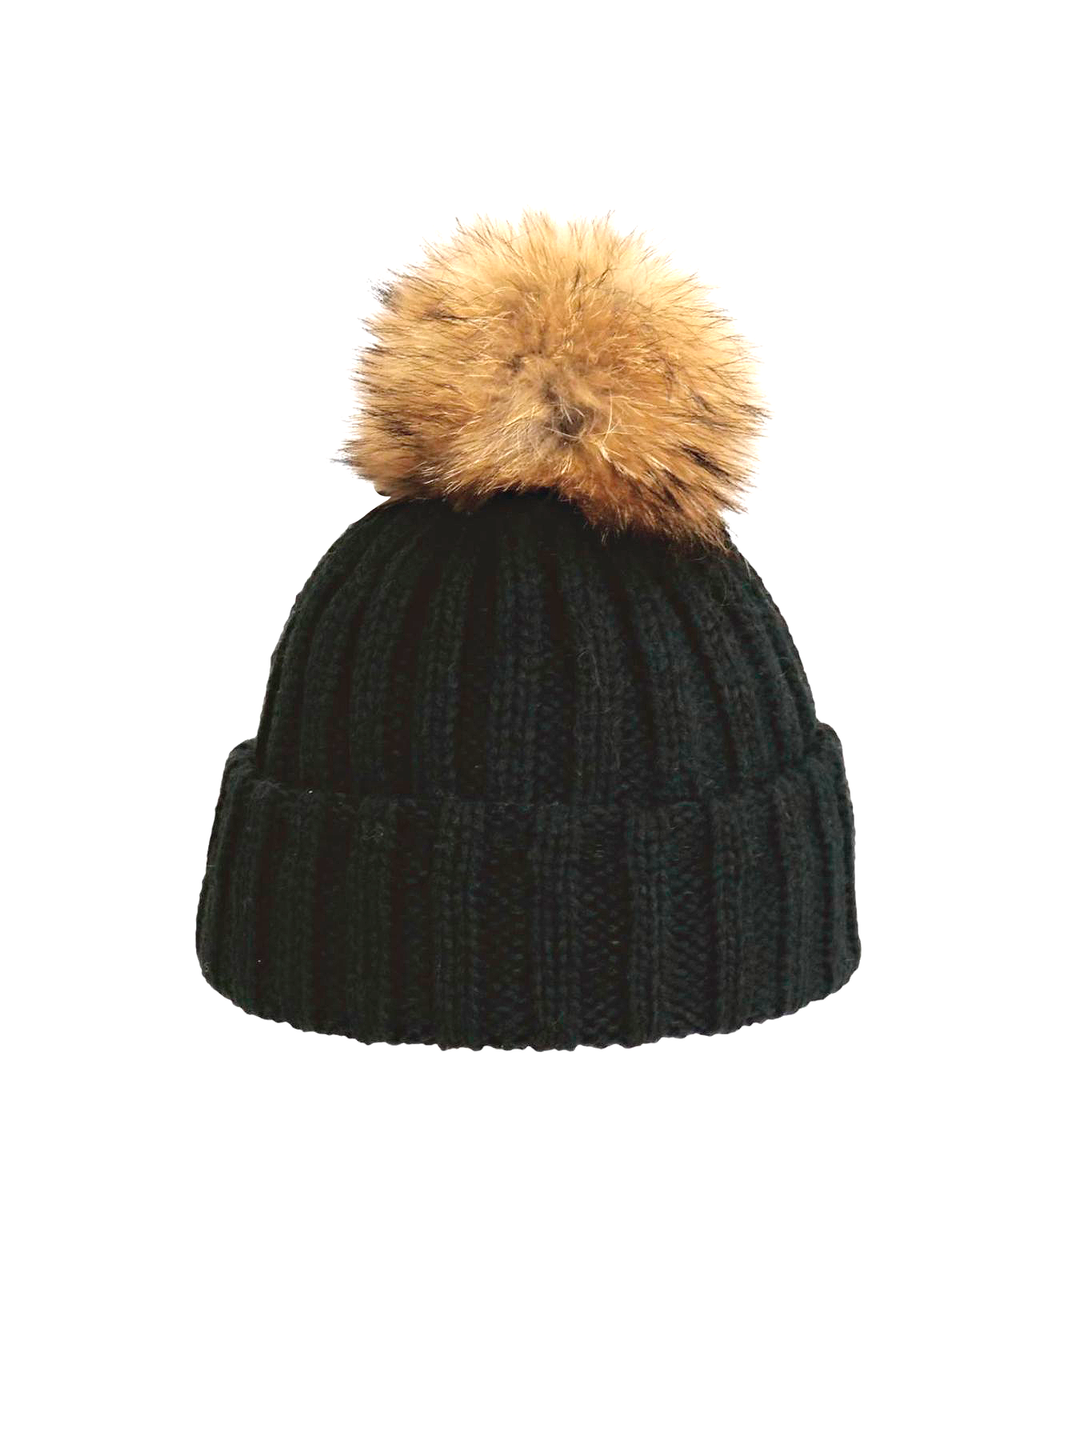 Beanie Hat - Knitted Acrylic - Black